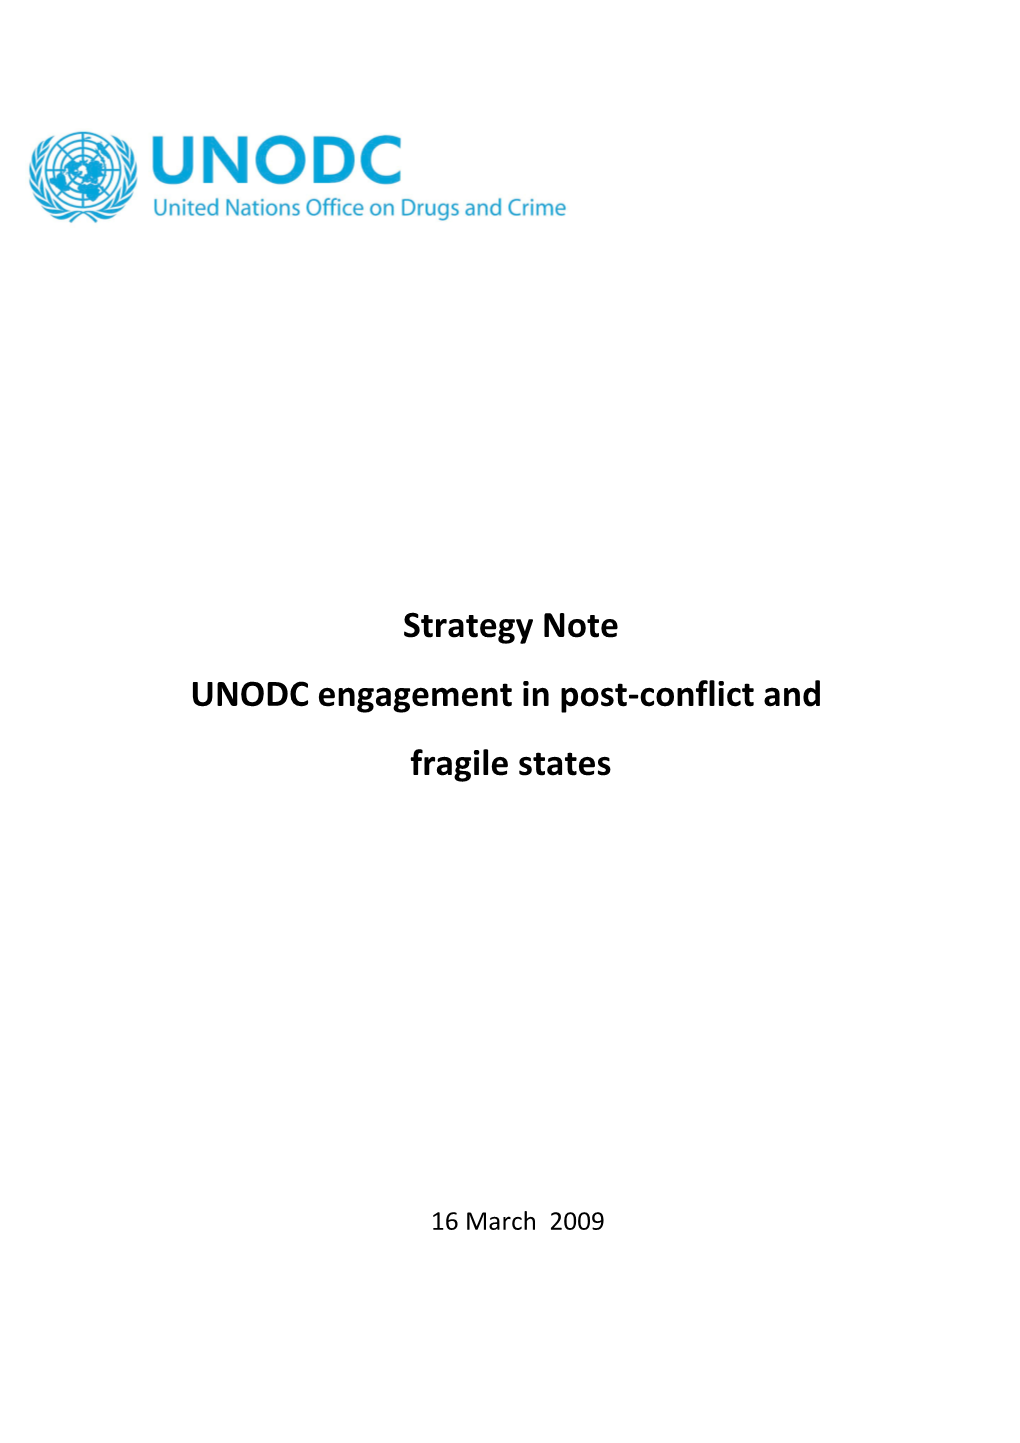 UNODC Engagement in Post-Conflict And